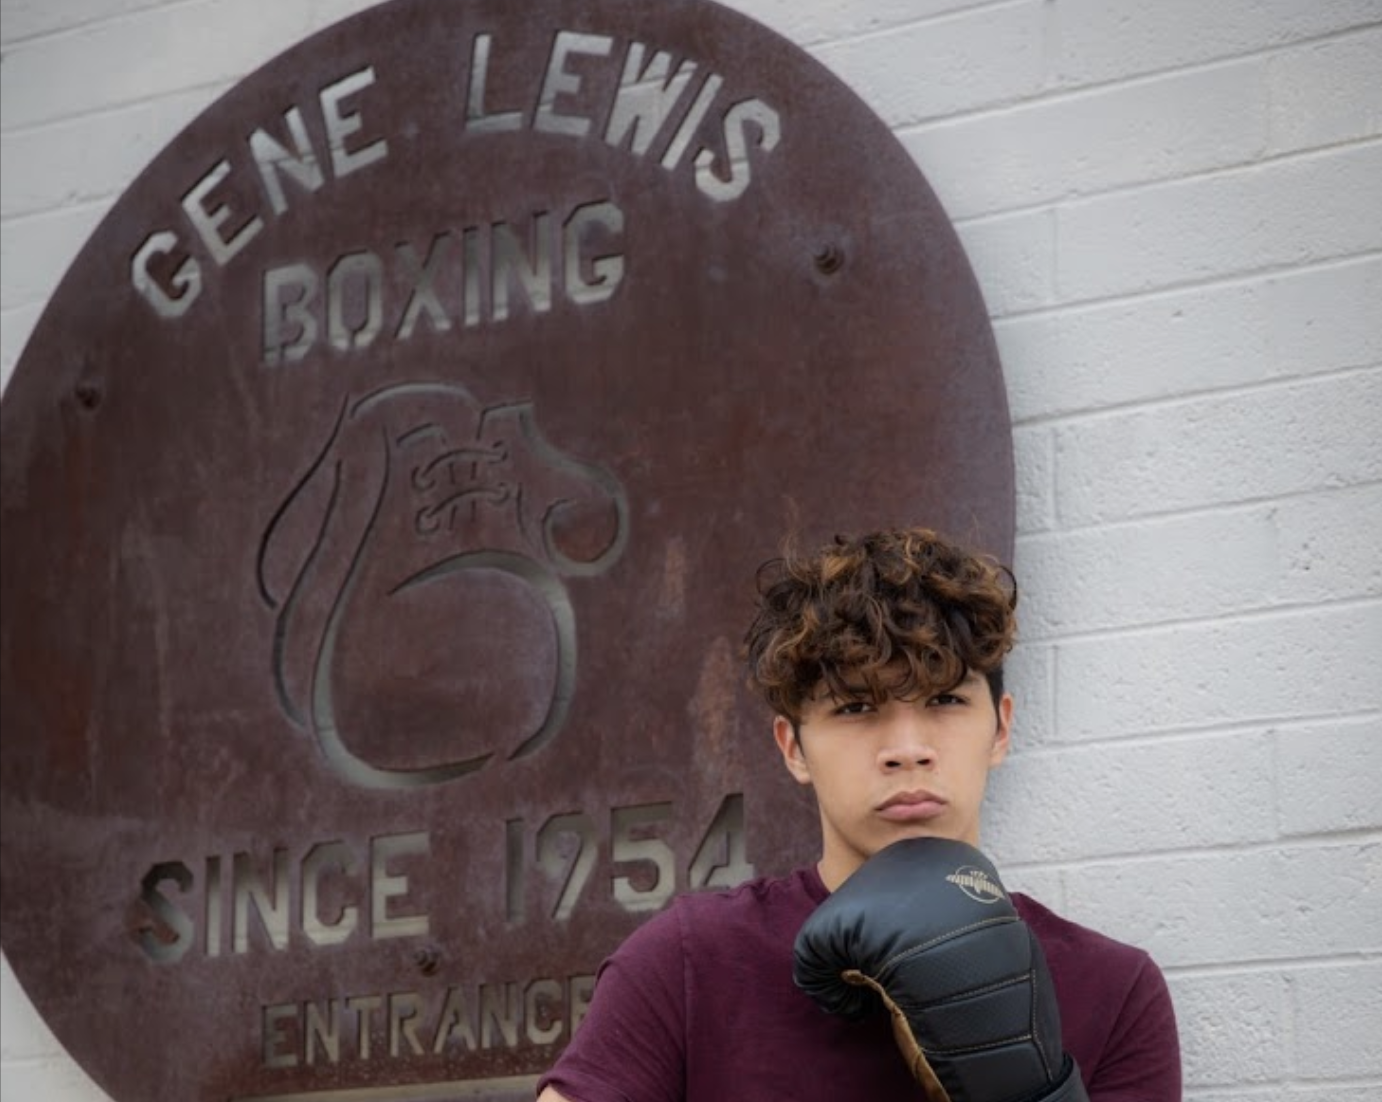 Gene Lewis Boxing Club To promote decency and prevent delinquency